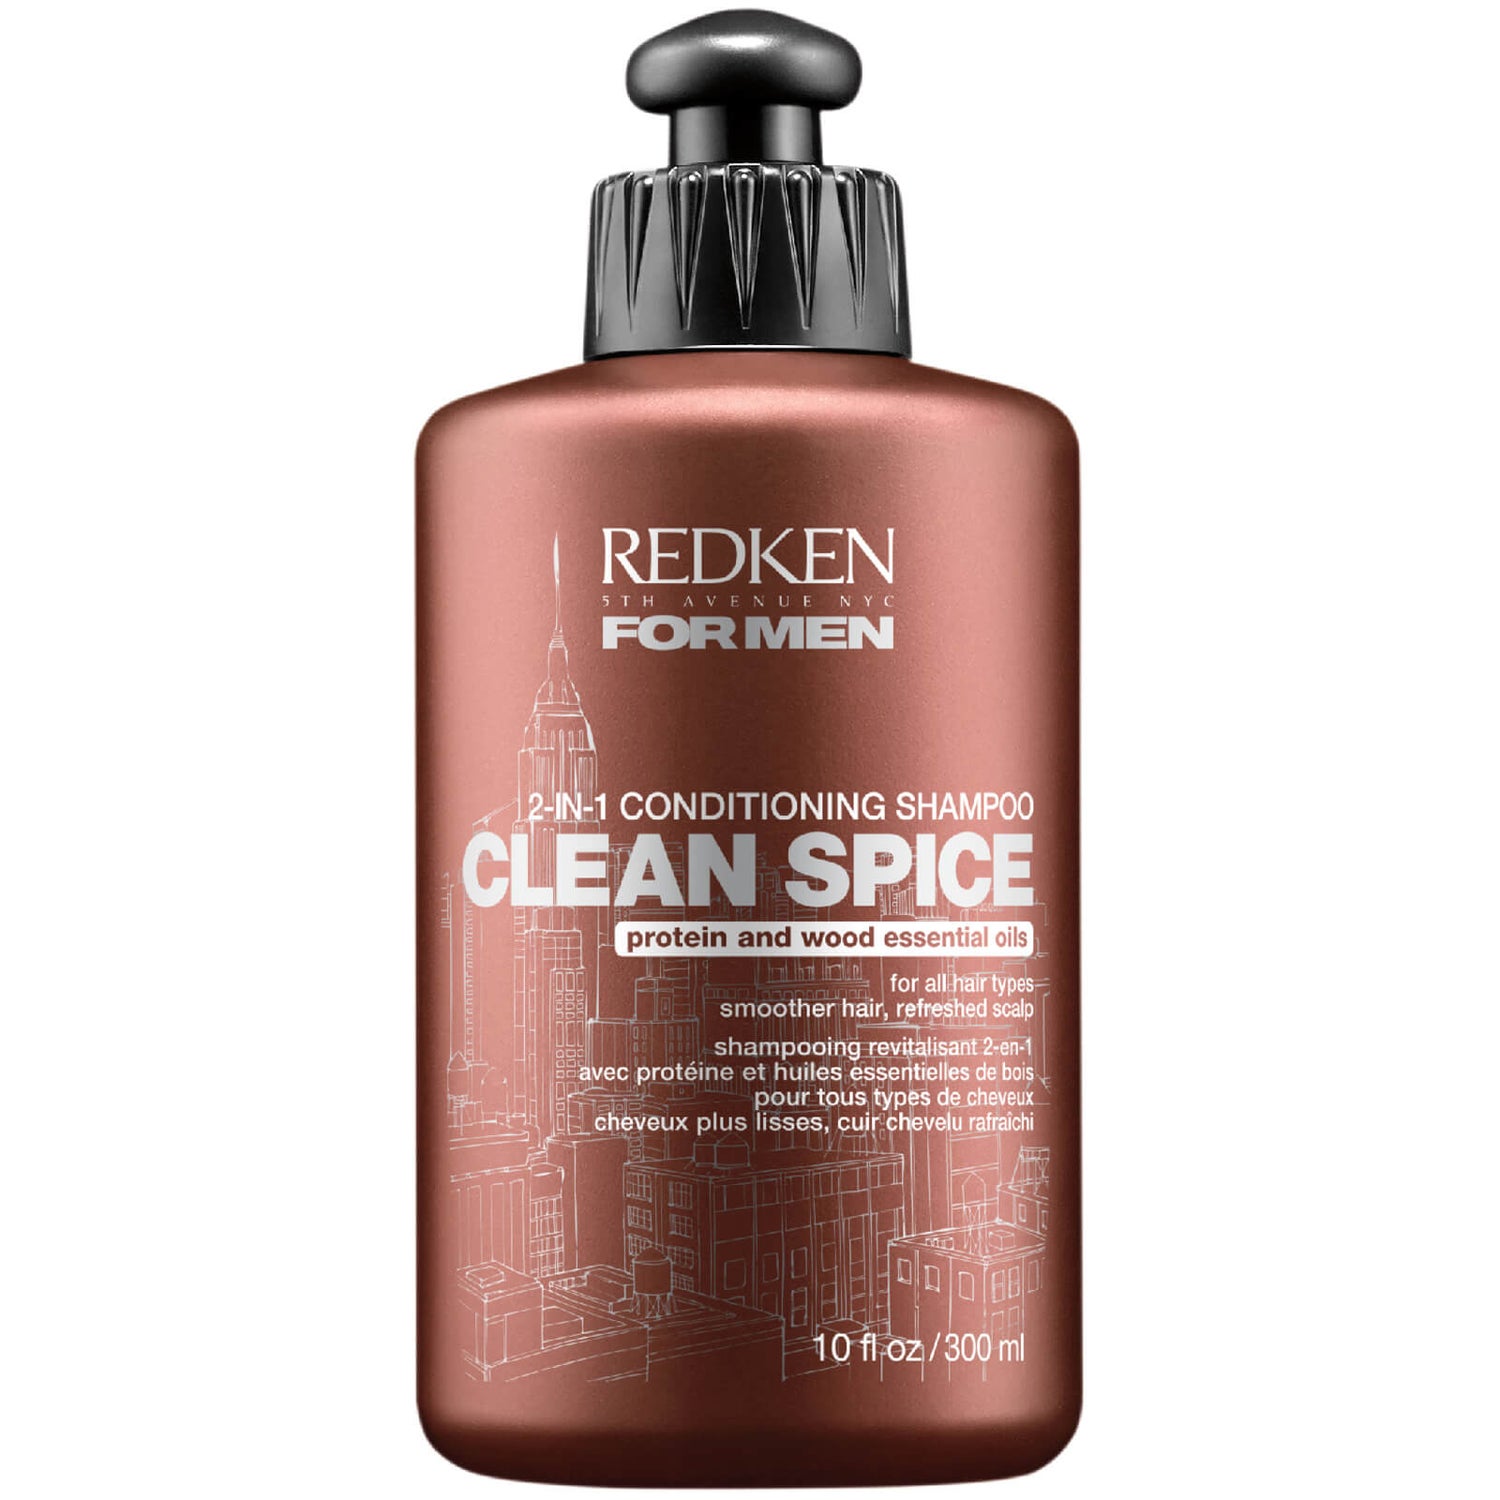 Redken for Men Clean Spice 2-in-1 Shampoo and Coditioner |